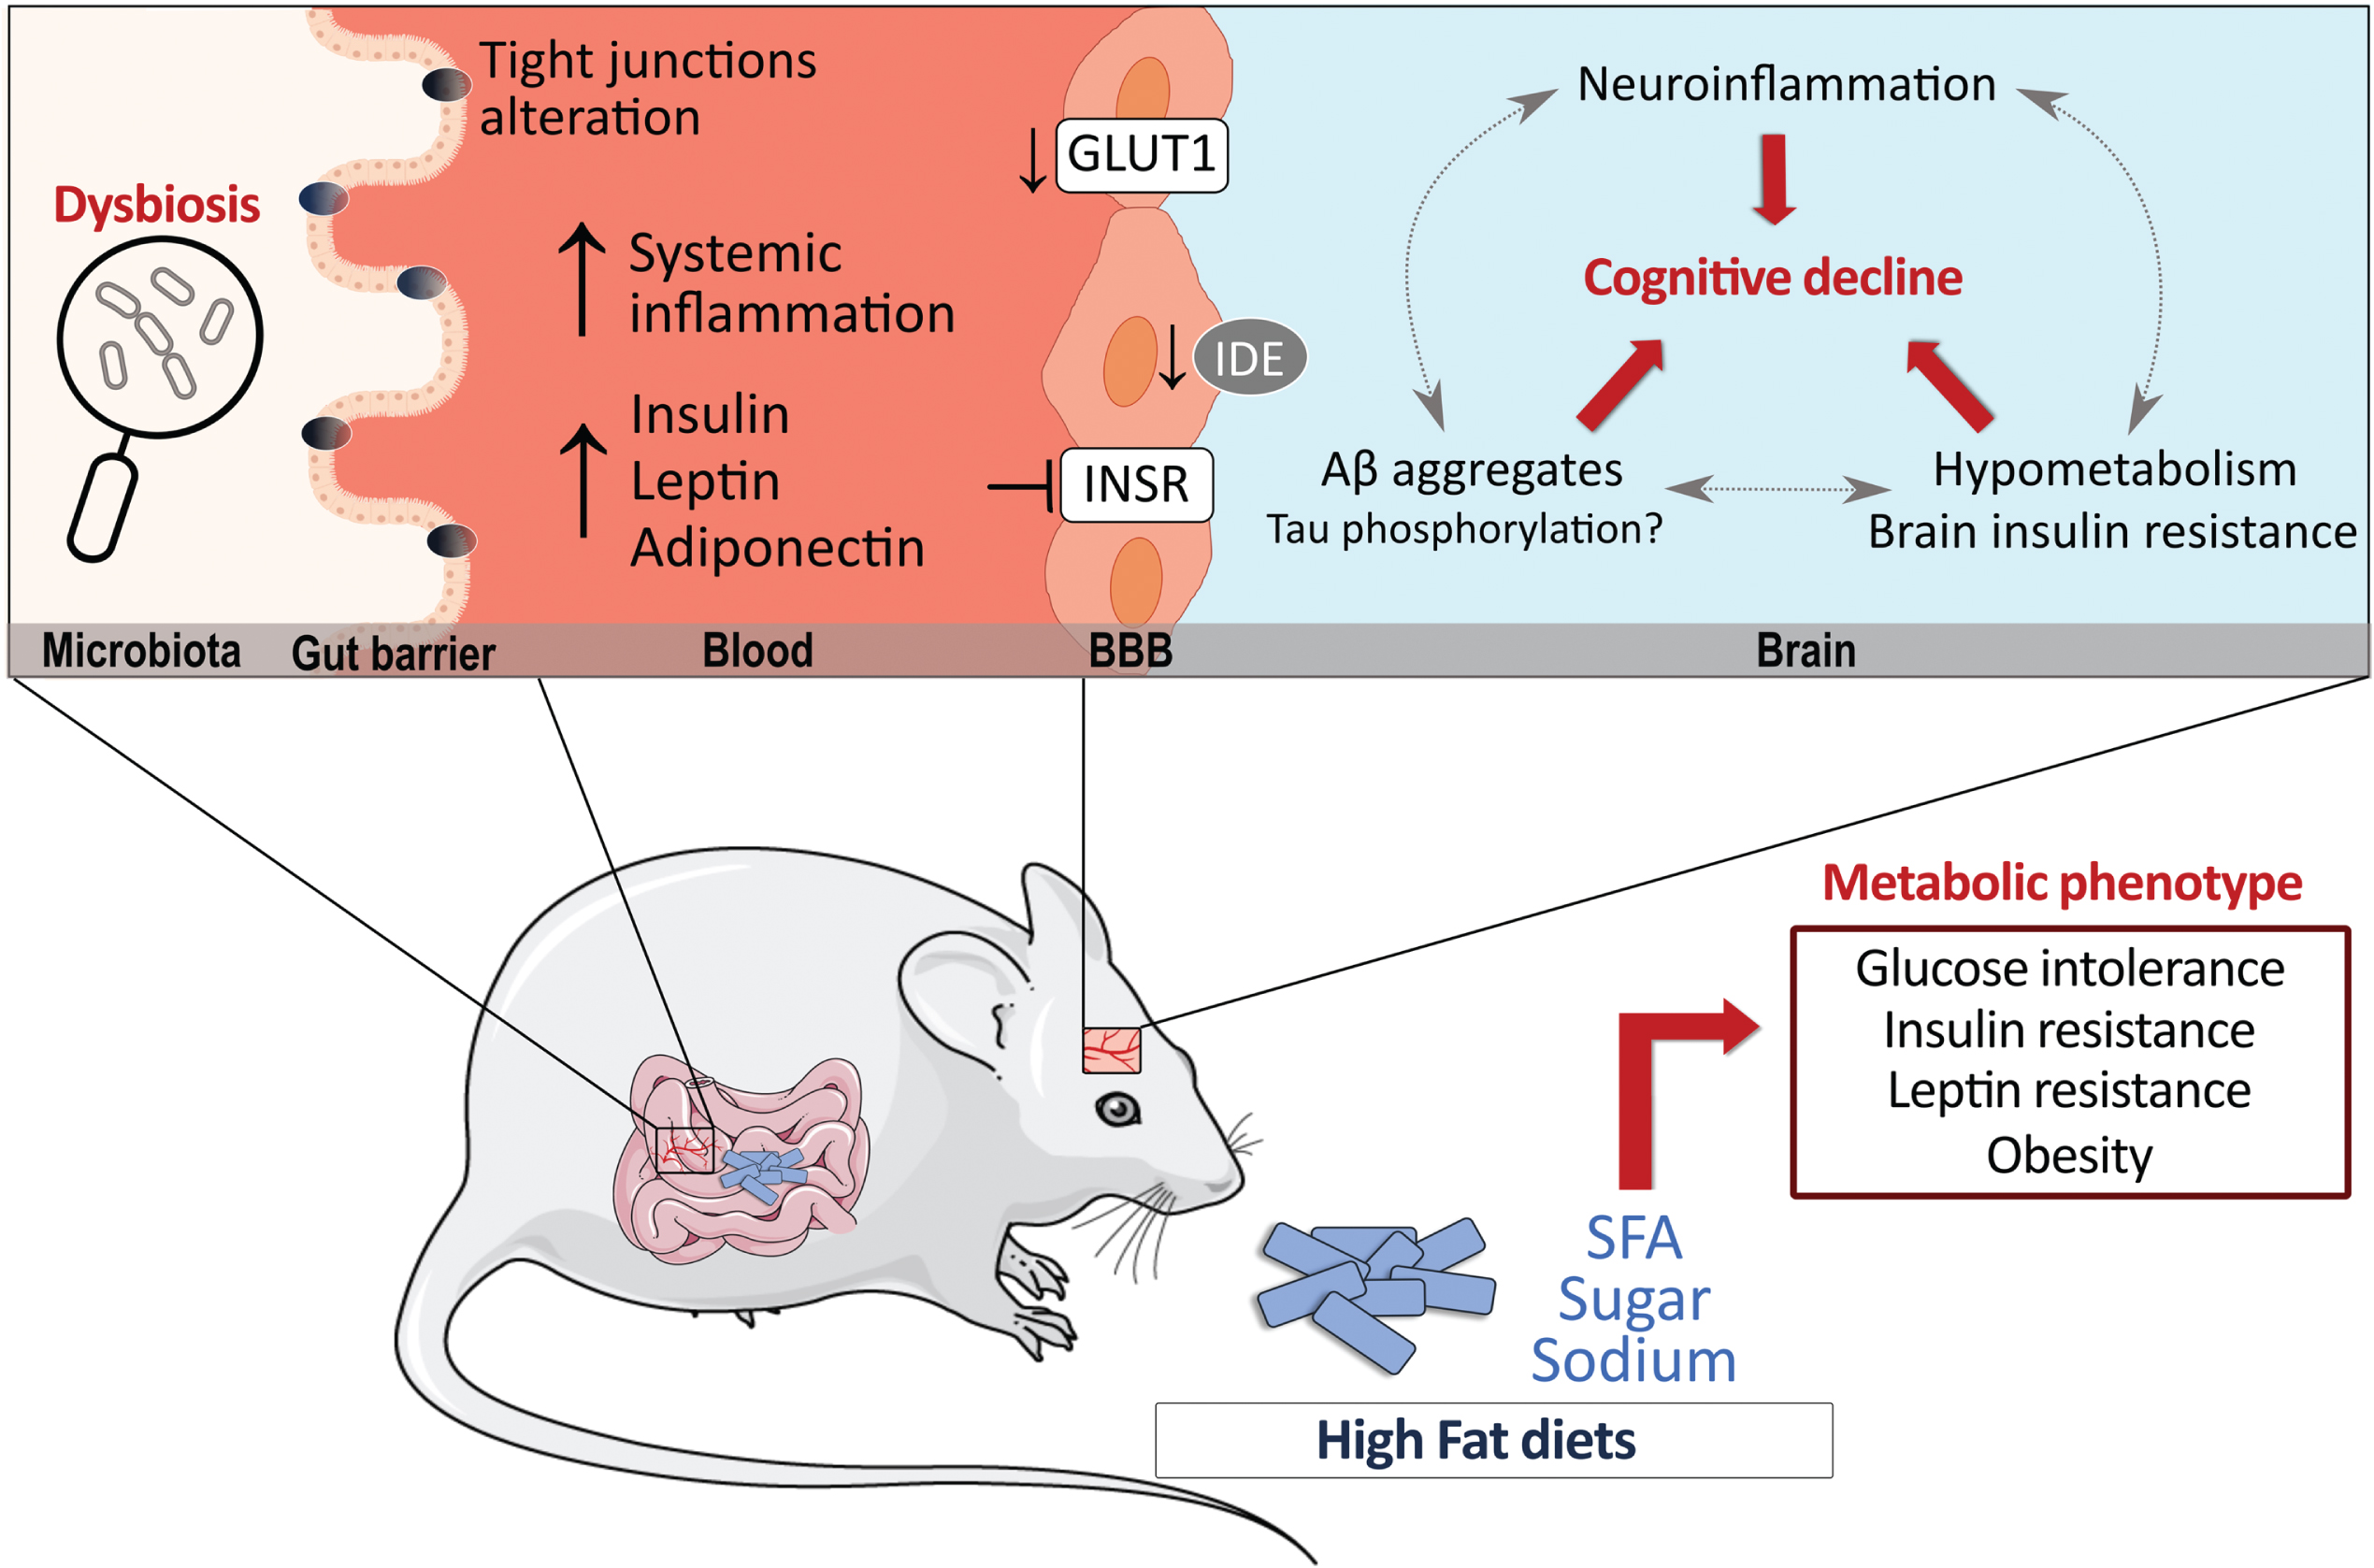 High-fat diets (HFD) have significant metabolic effects and can contribute to Alzheimer’s disease (AD) pathology. Possible mechanisms by which HFD can modulate AD pathology are shown, whether directly in the brain or indirectly in the periphery. Data suggest that HFD may promote insulin resistance and decrease GLUT-1 and IDE at the cerebrovascular level while also triggering an inflammatory response in the brain. In the periphery, the alteration of insulin metabolism, adipokines and gut microbiota can indirectly affect brain processes. Finally, the majority of reports indicate that a prolonged exposure to a HFD increases brain Aβ levels, whether its effects in tau pathology is less clear. Aβ, amyloid peptides; BBB, blood-brain barrier; GLUT1, glucose transporter 1; IDE, insulin degrading enzyme; INSR, insulin receptor; SFA, saturated fatty acids.